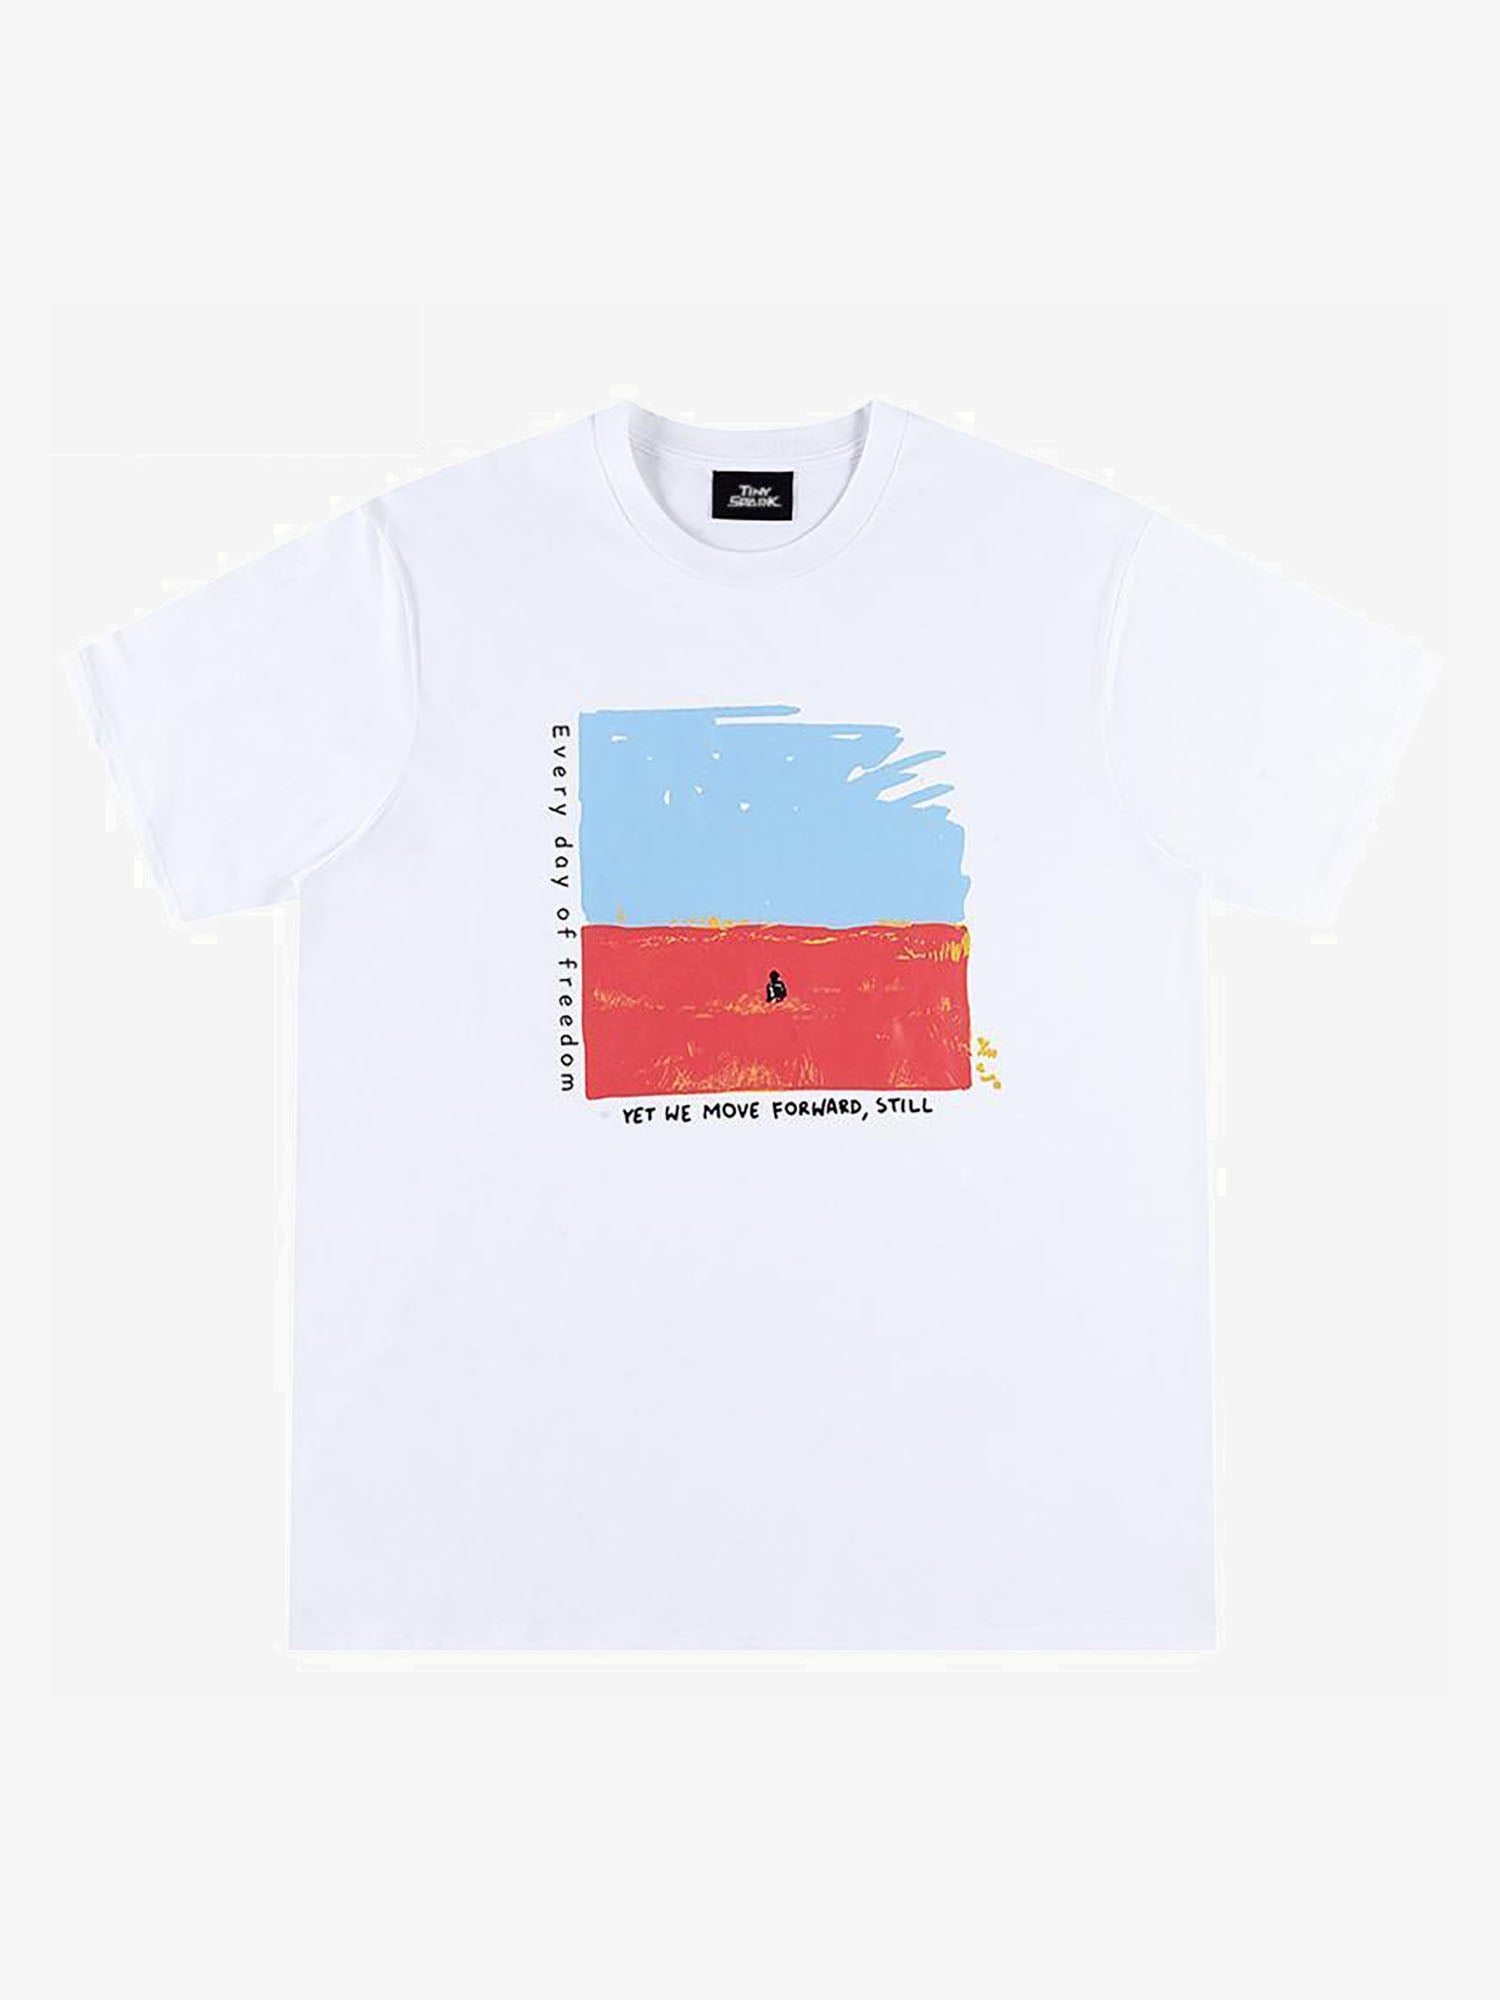 JUSTNOTAG Letter Graphic Print Short Sleeve Tee